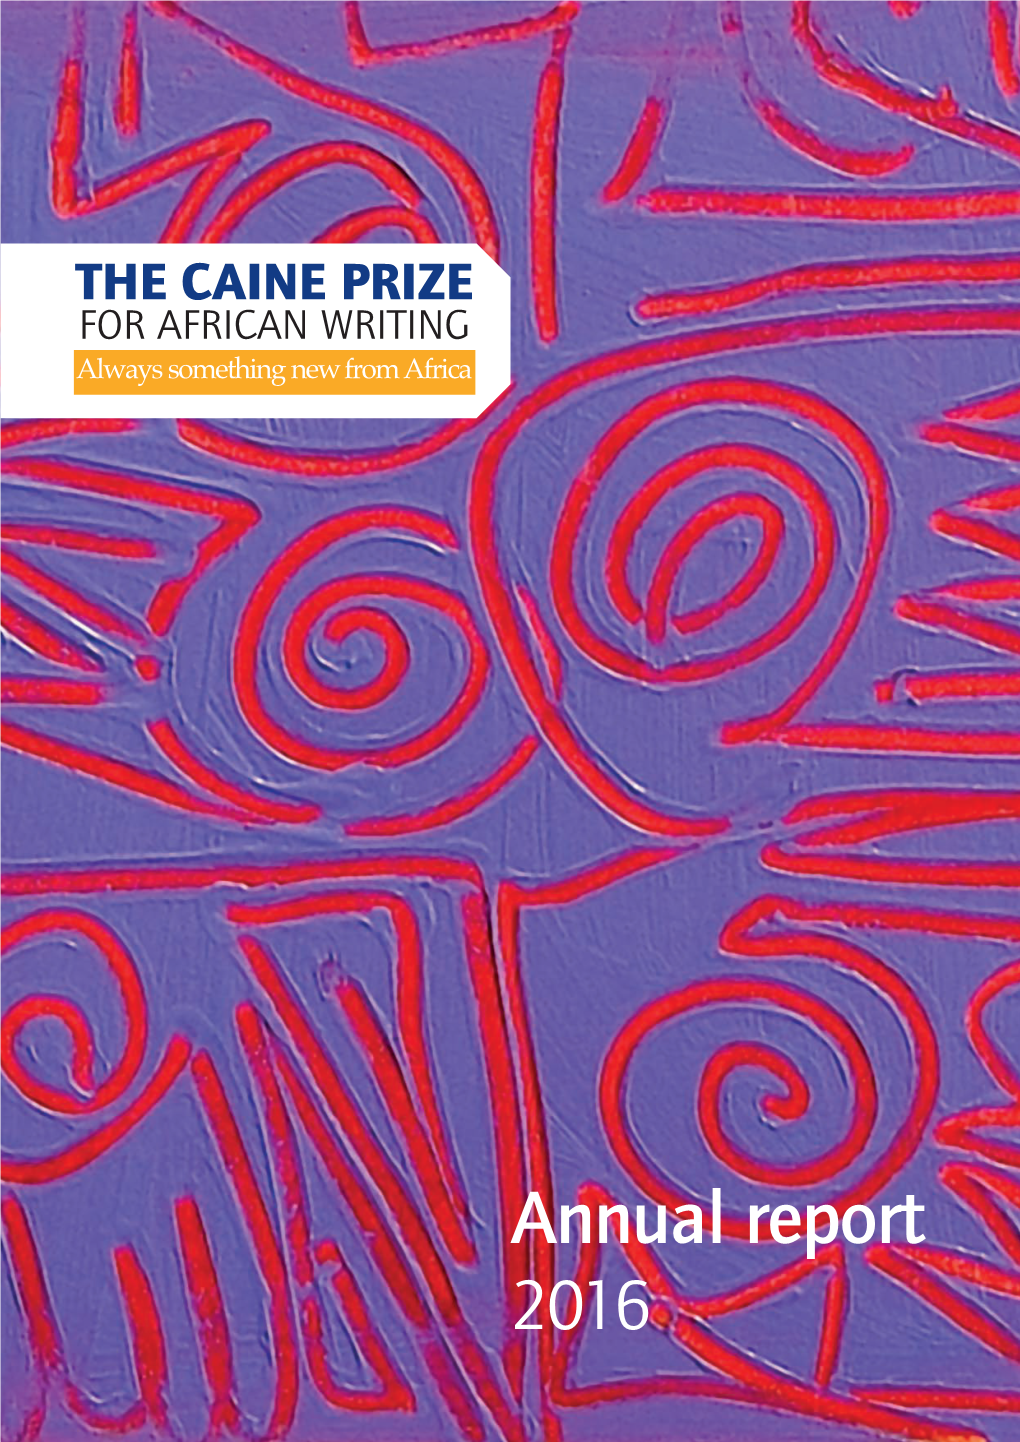 Caine Prize Annual Report 2016 Rev.Indd